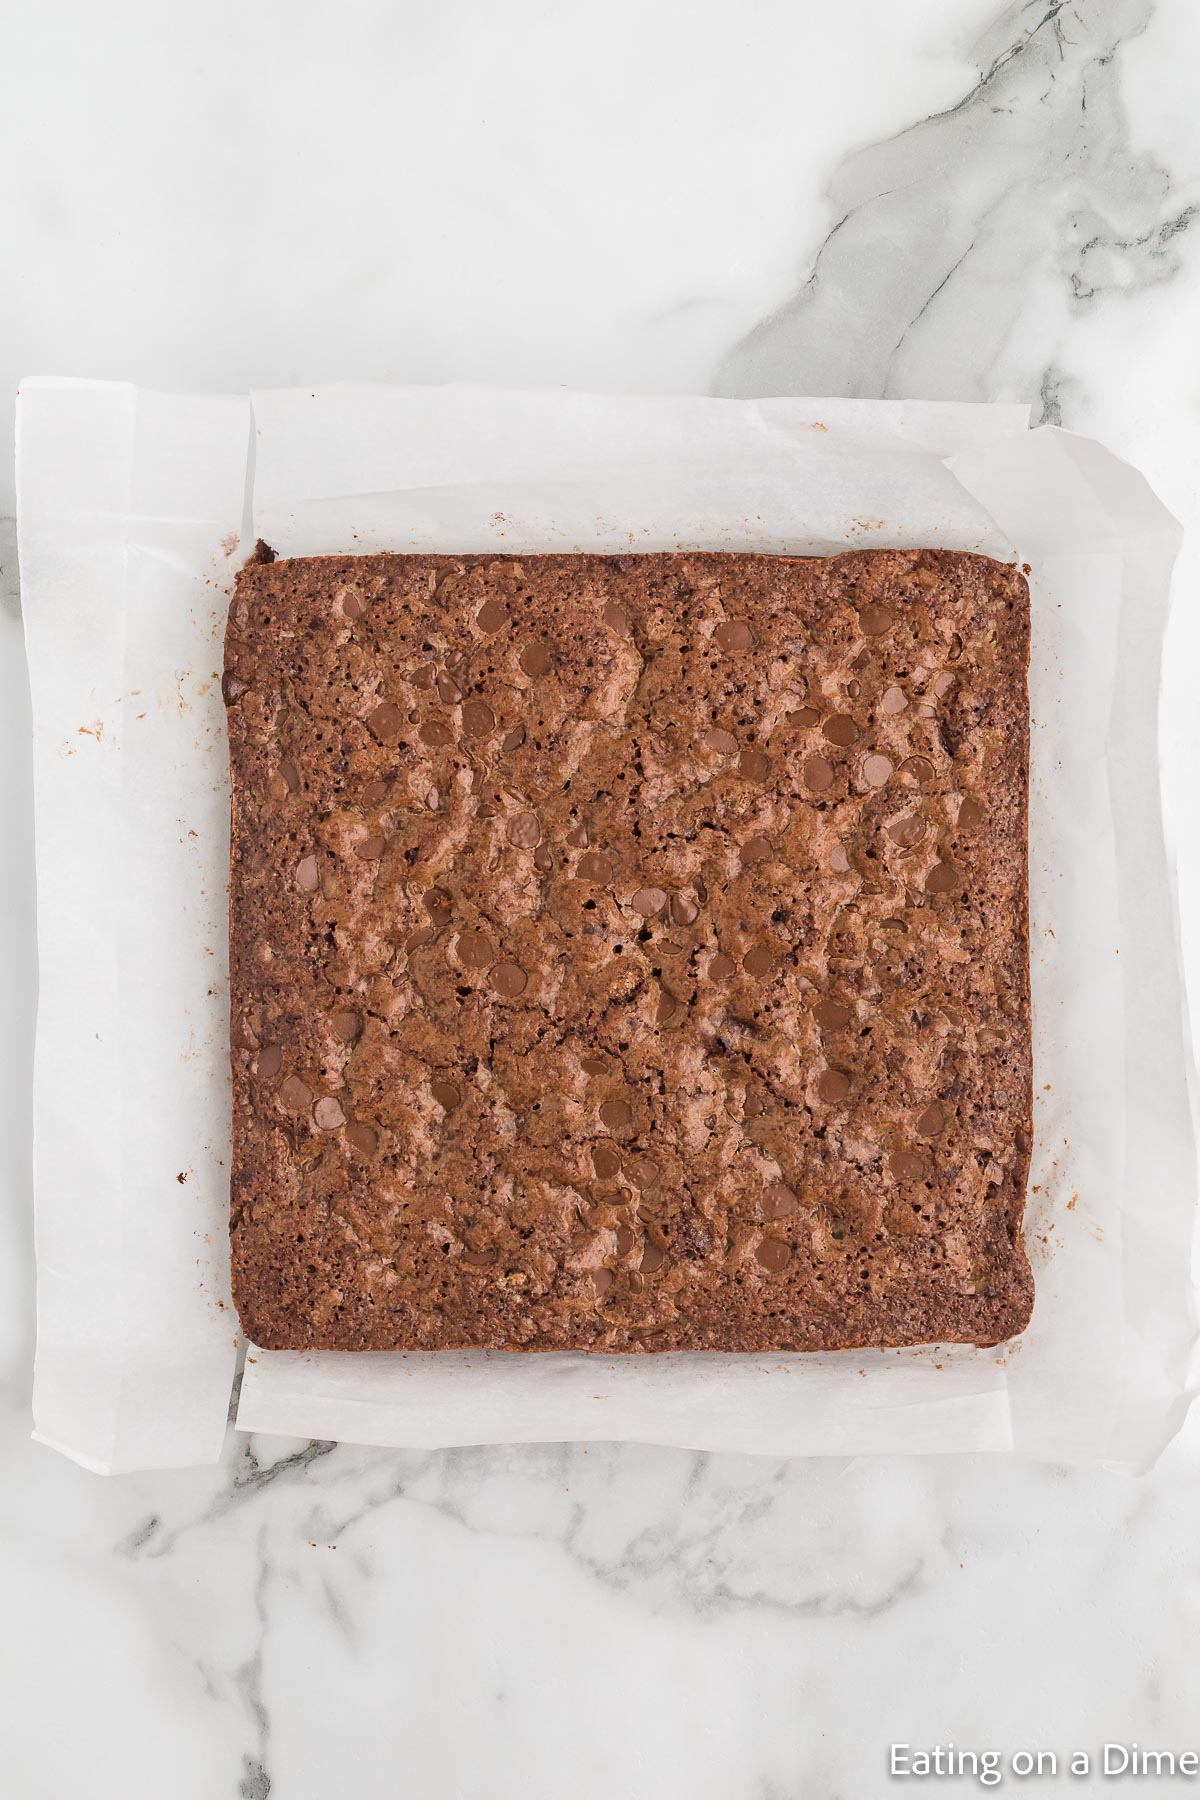 Prepared Brownie on parchment paper